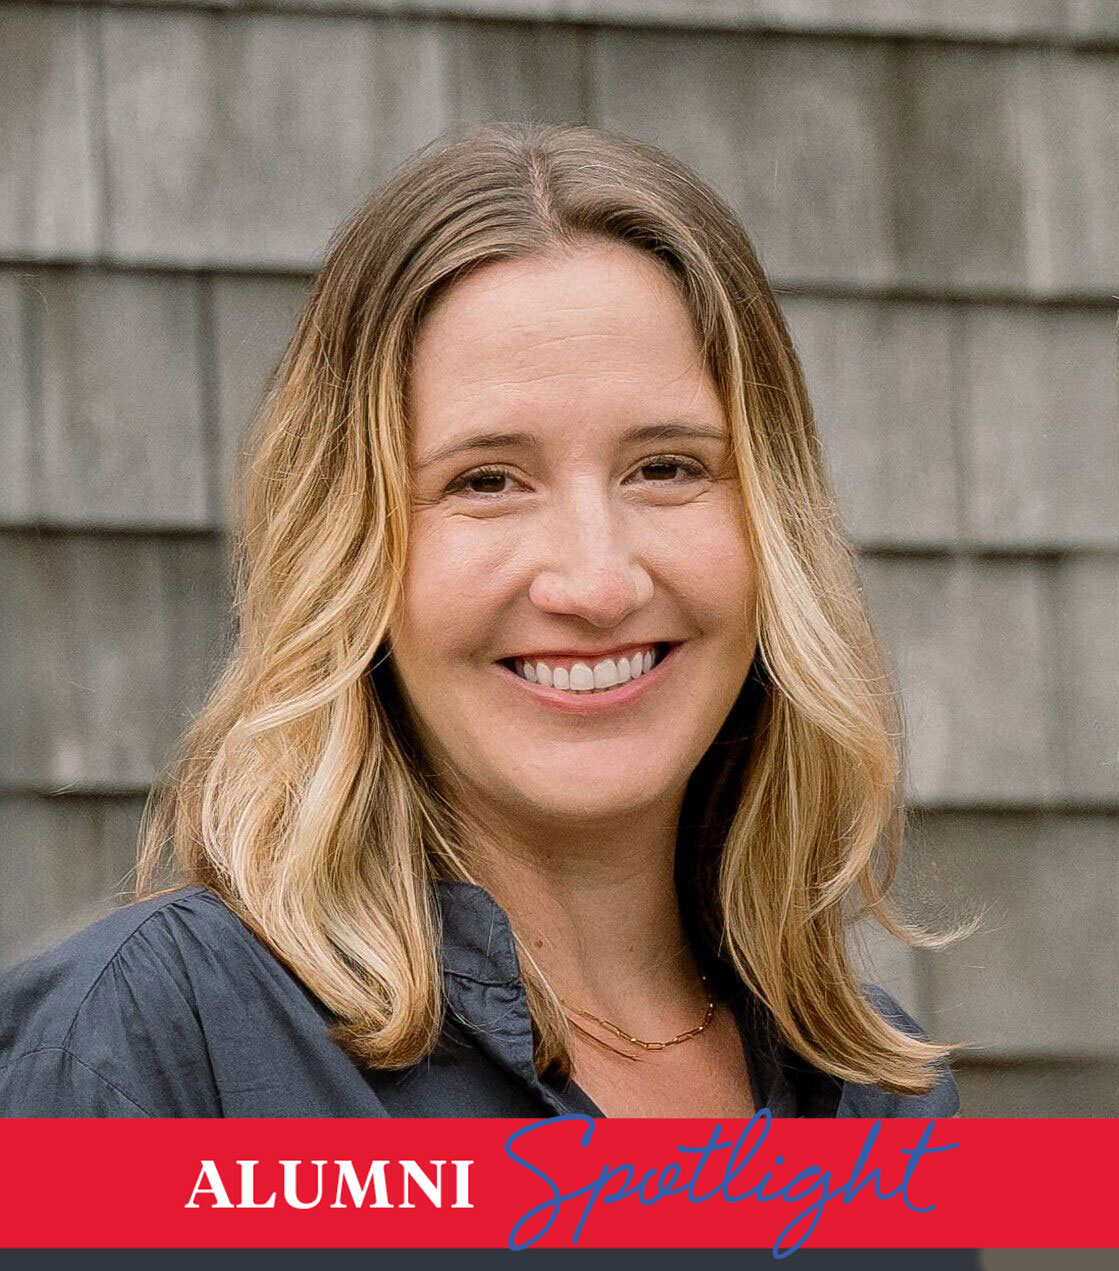 CCPA alum Kelly Lavin (B.A. '10) is the Director of PR for Marriott Bonvoy.